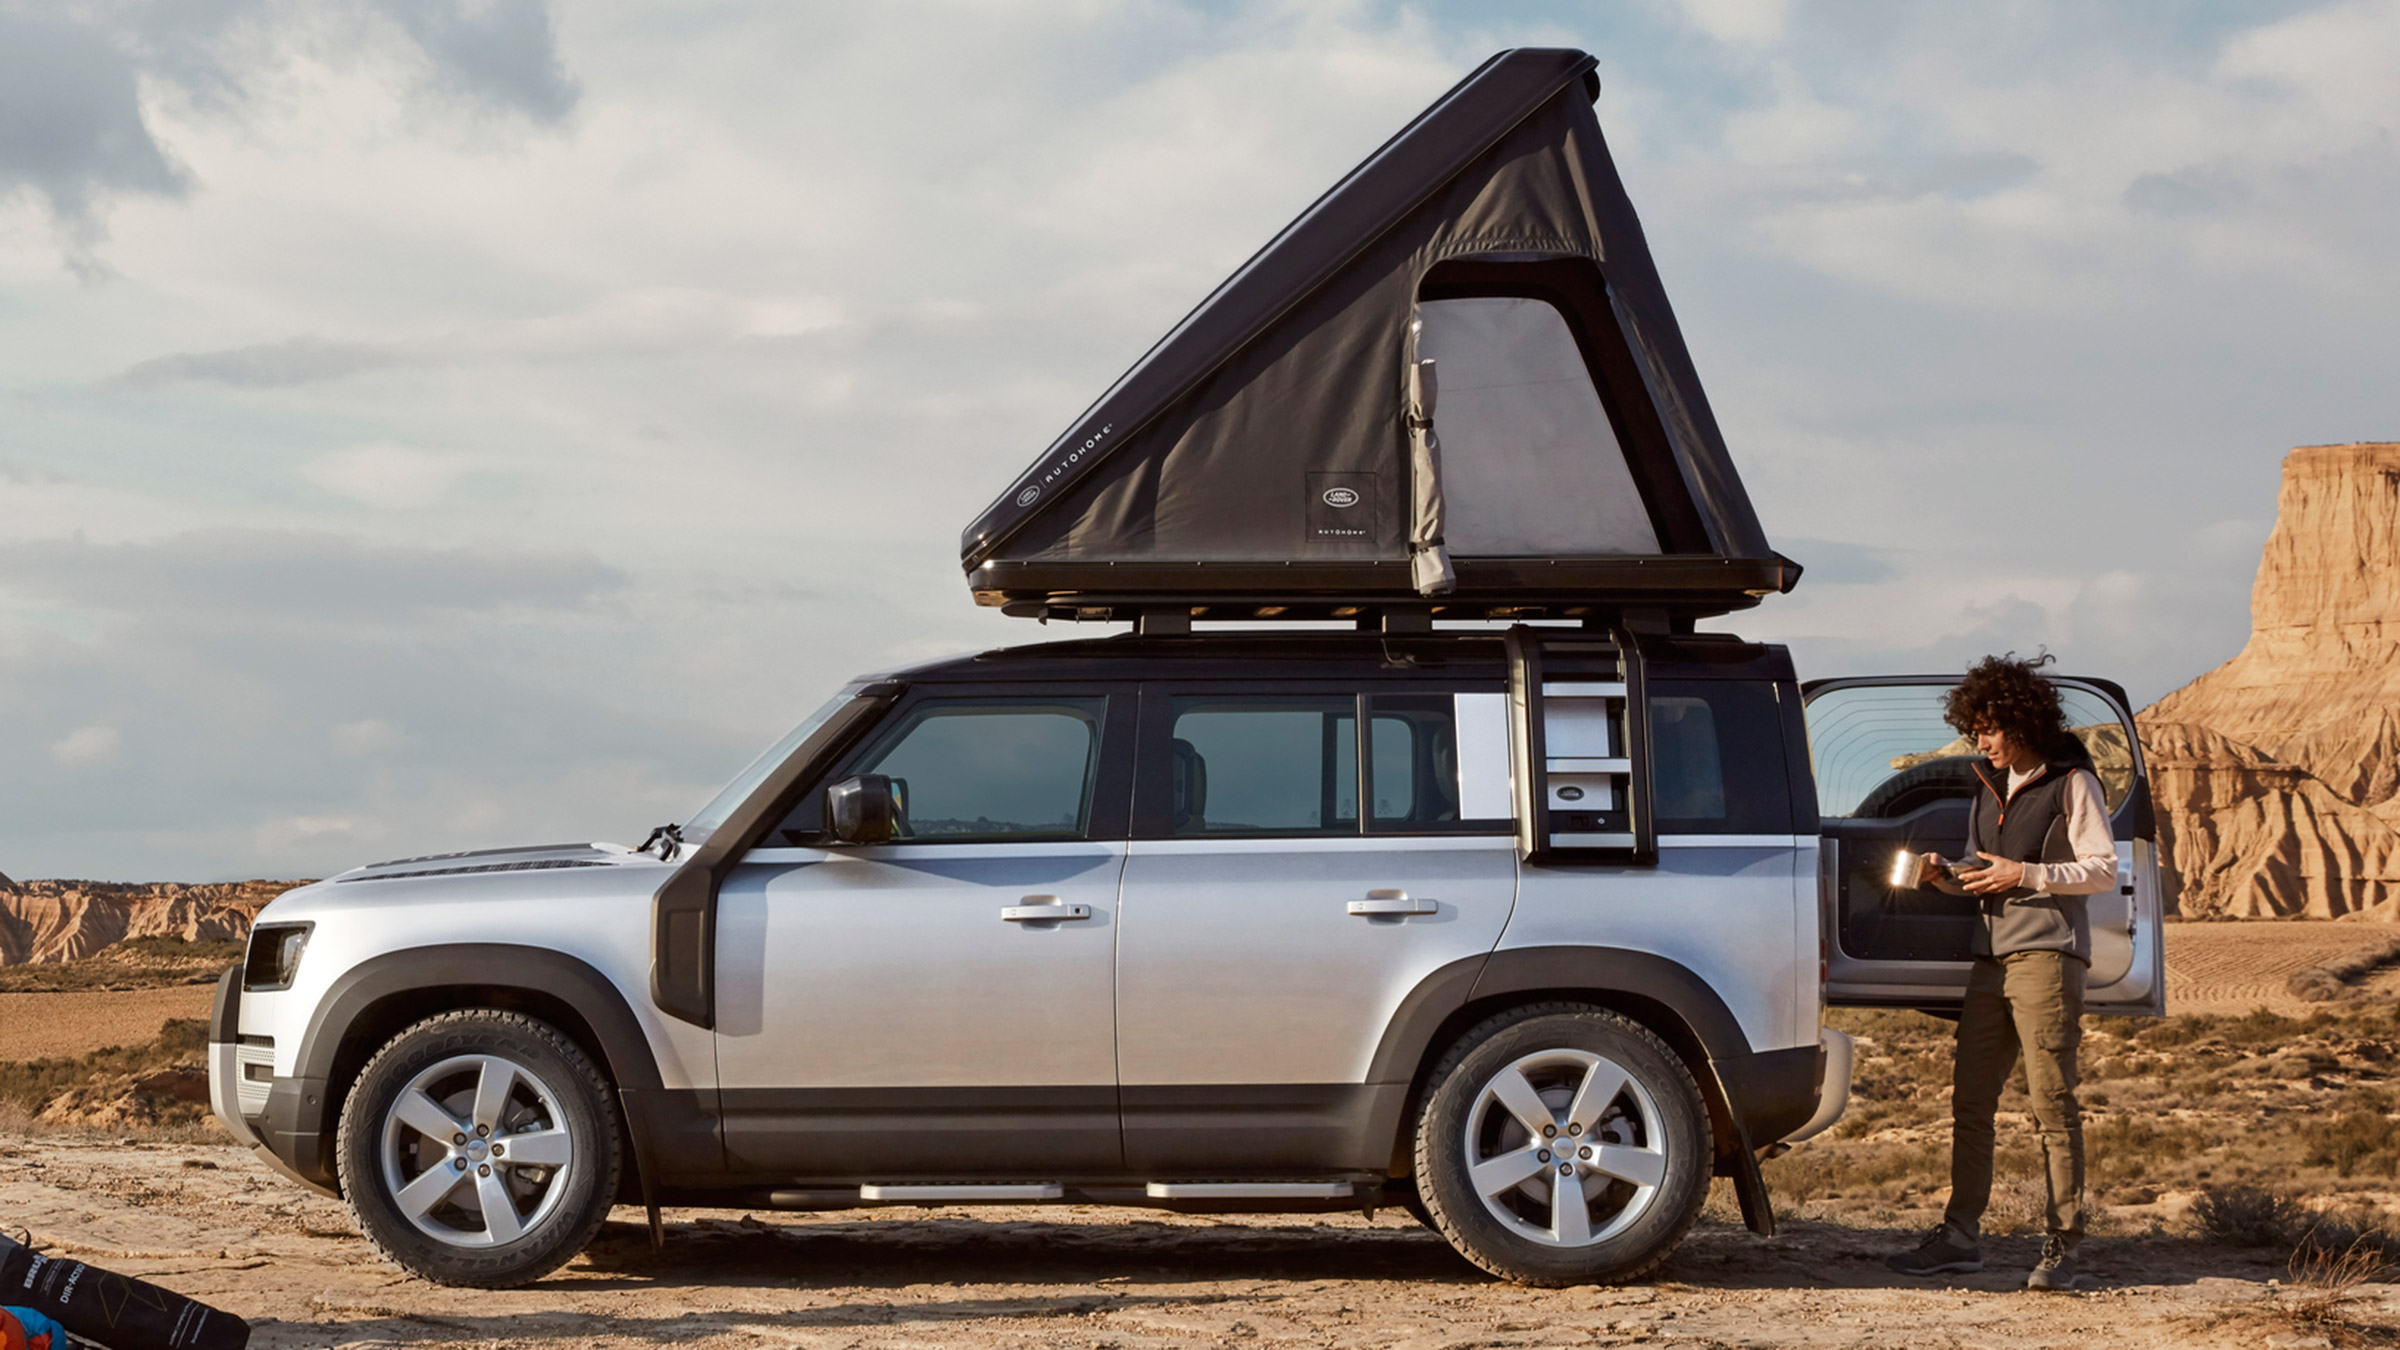 New Land Rover Defender 110 roof tent launched  Auto Express